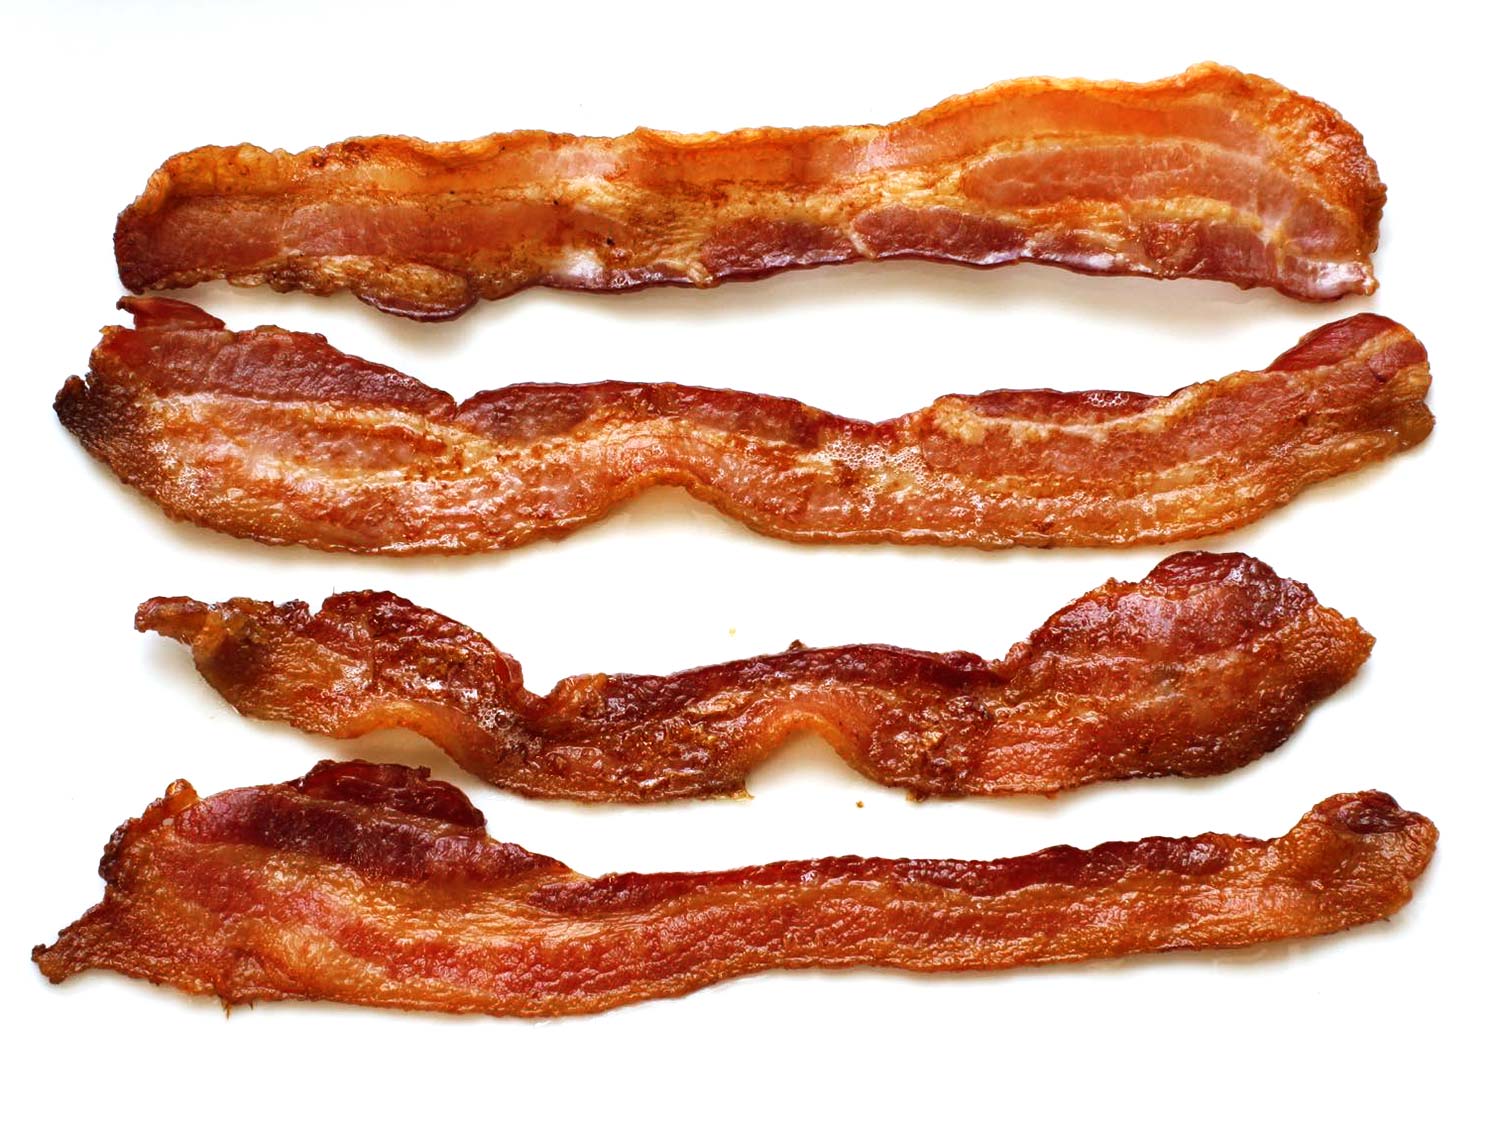 10 Reasons Why Bacon Is Awesome Food You Should Try